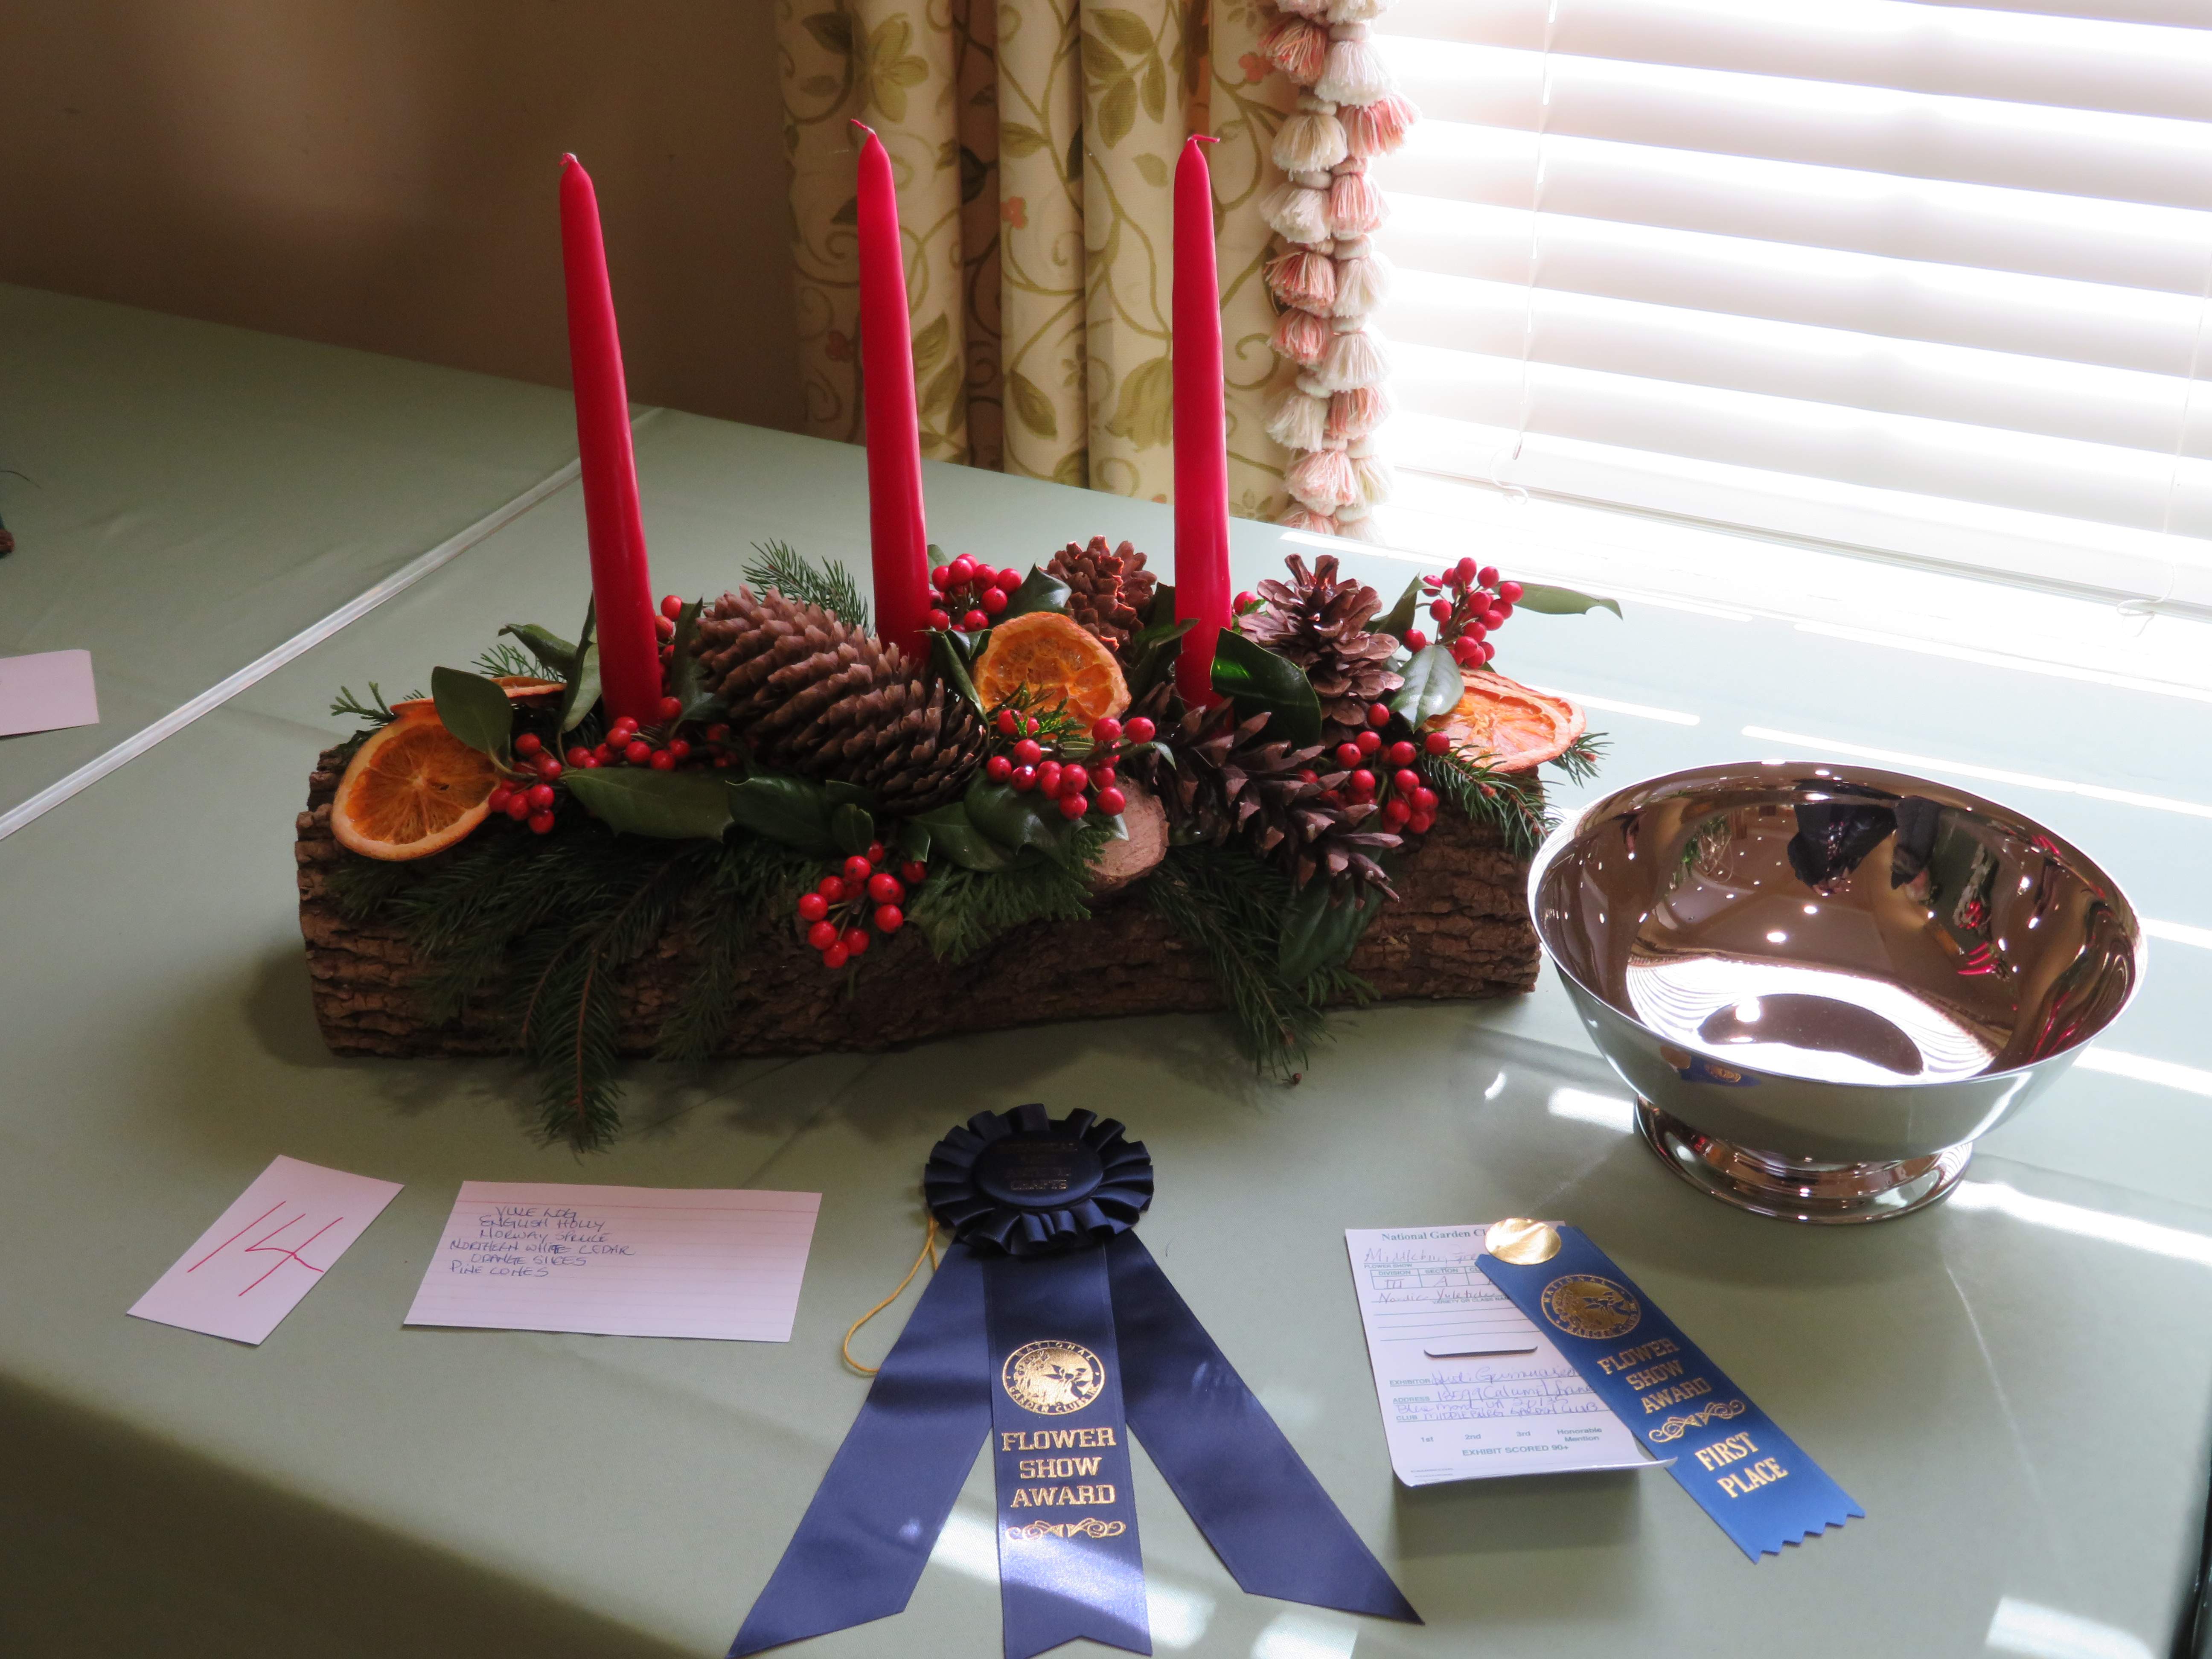 Christmas Around the World: The Middleburg Garden Club's Annual Flower Show  December 1-2, 2022